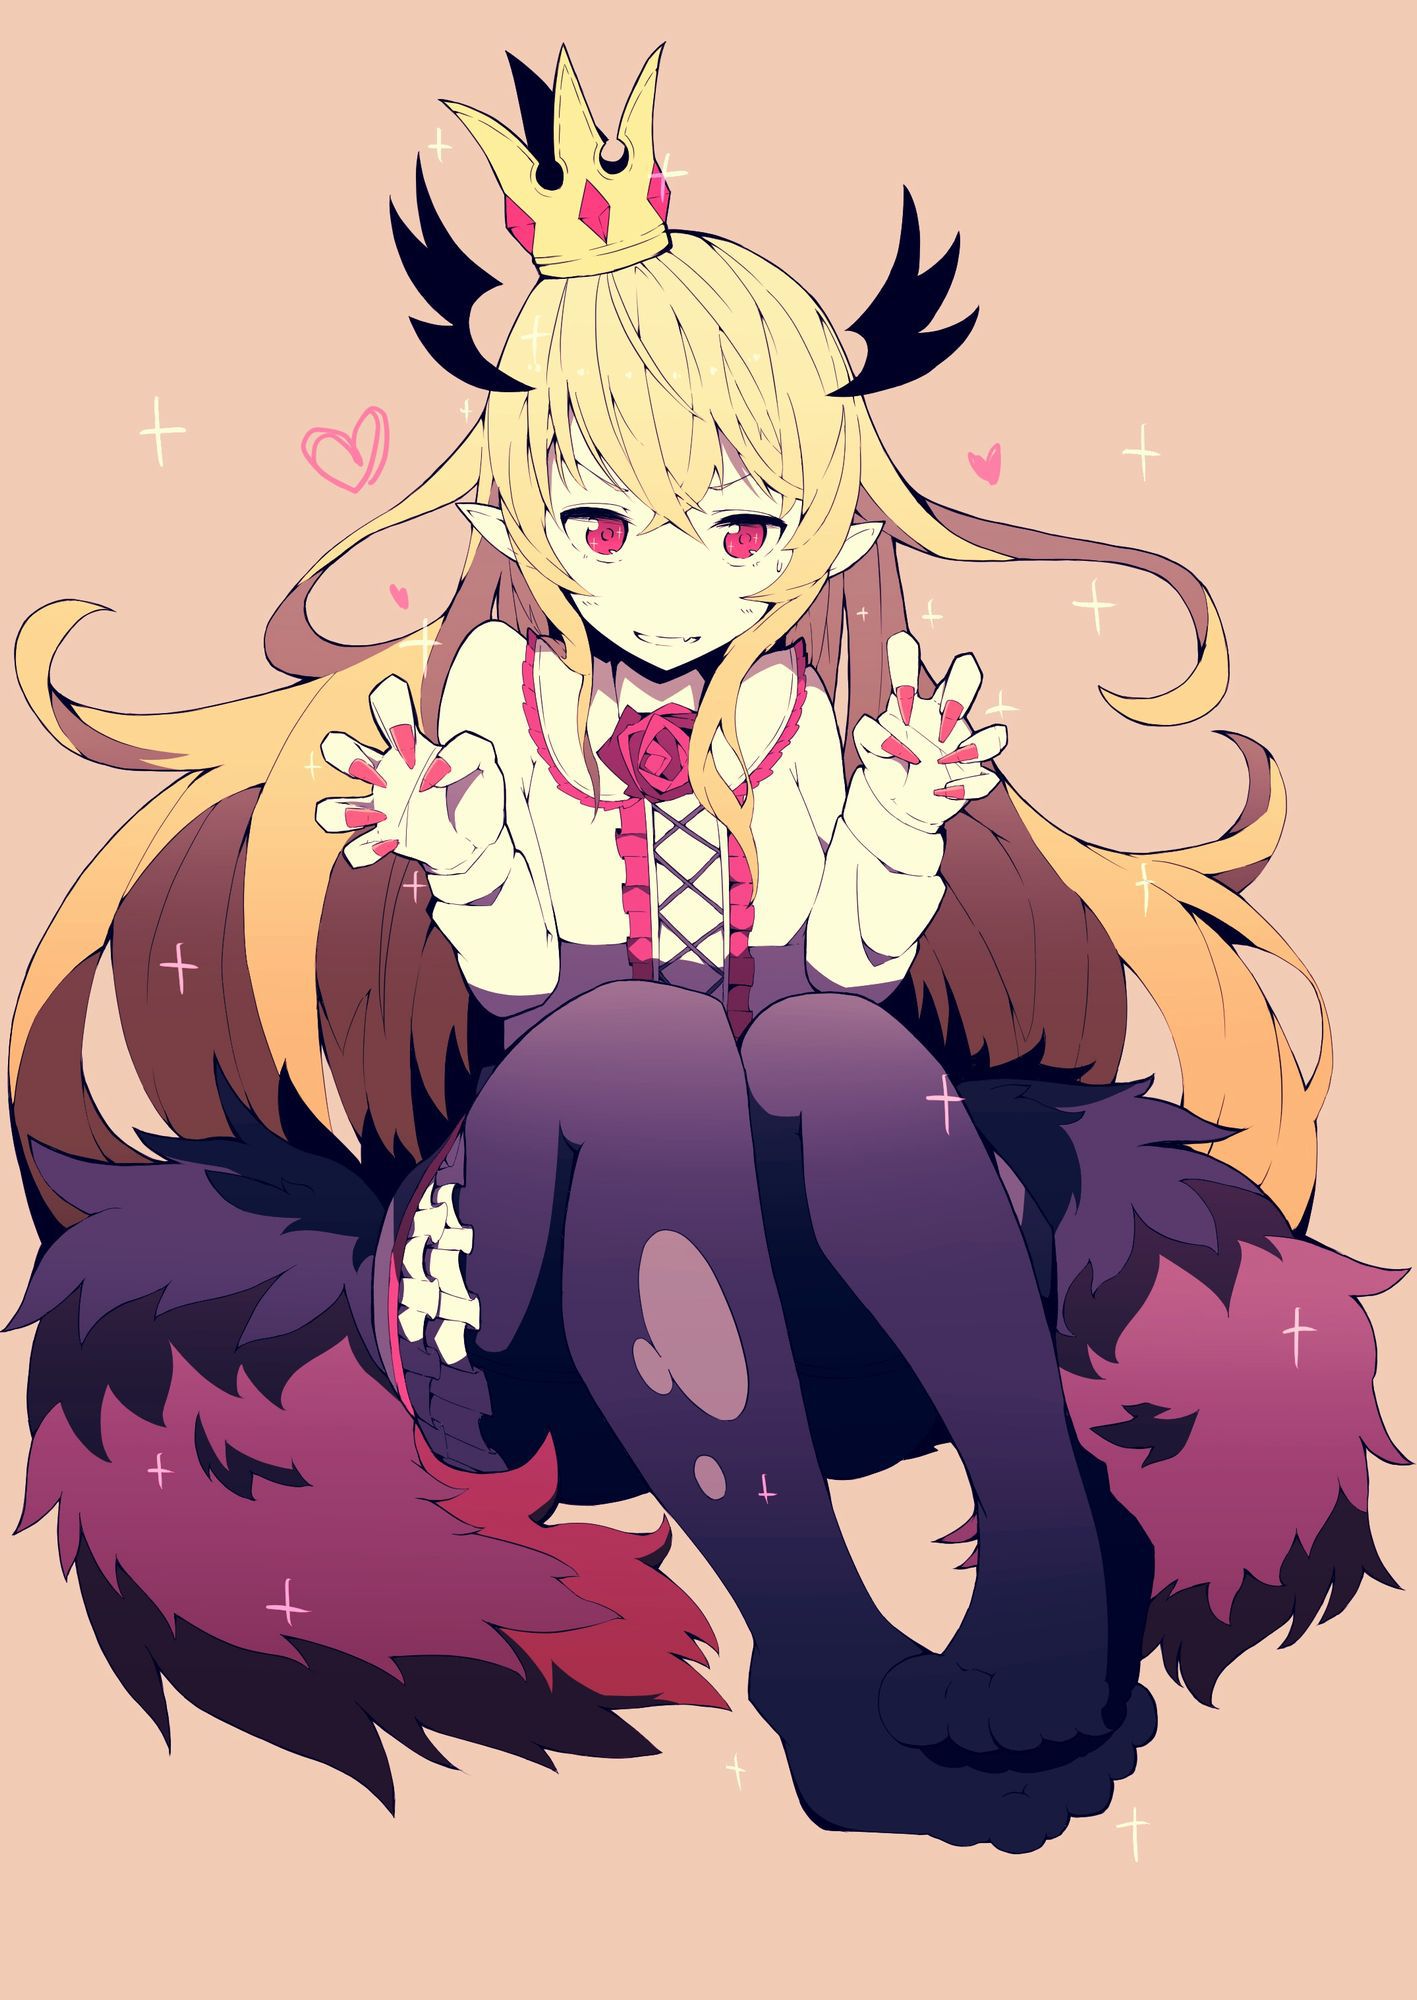 Vampy Chan (secondary-ZIP) to put on the shoes and cute images together "of God bahamut and grumble fantasy." 1